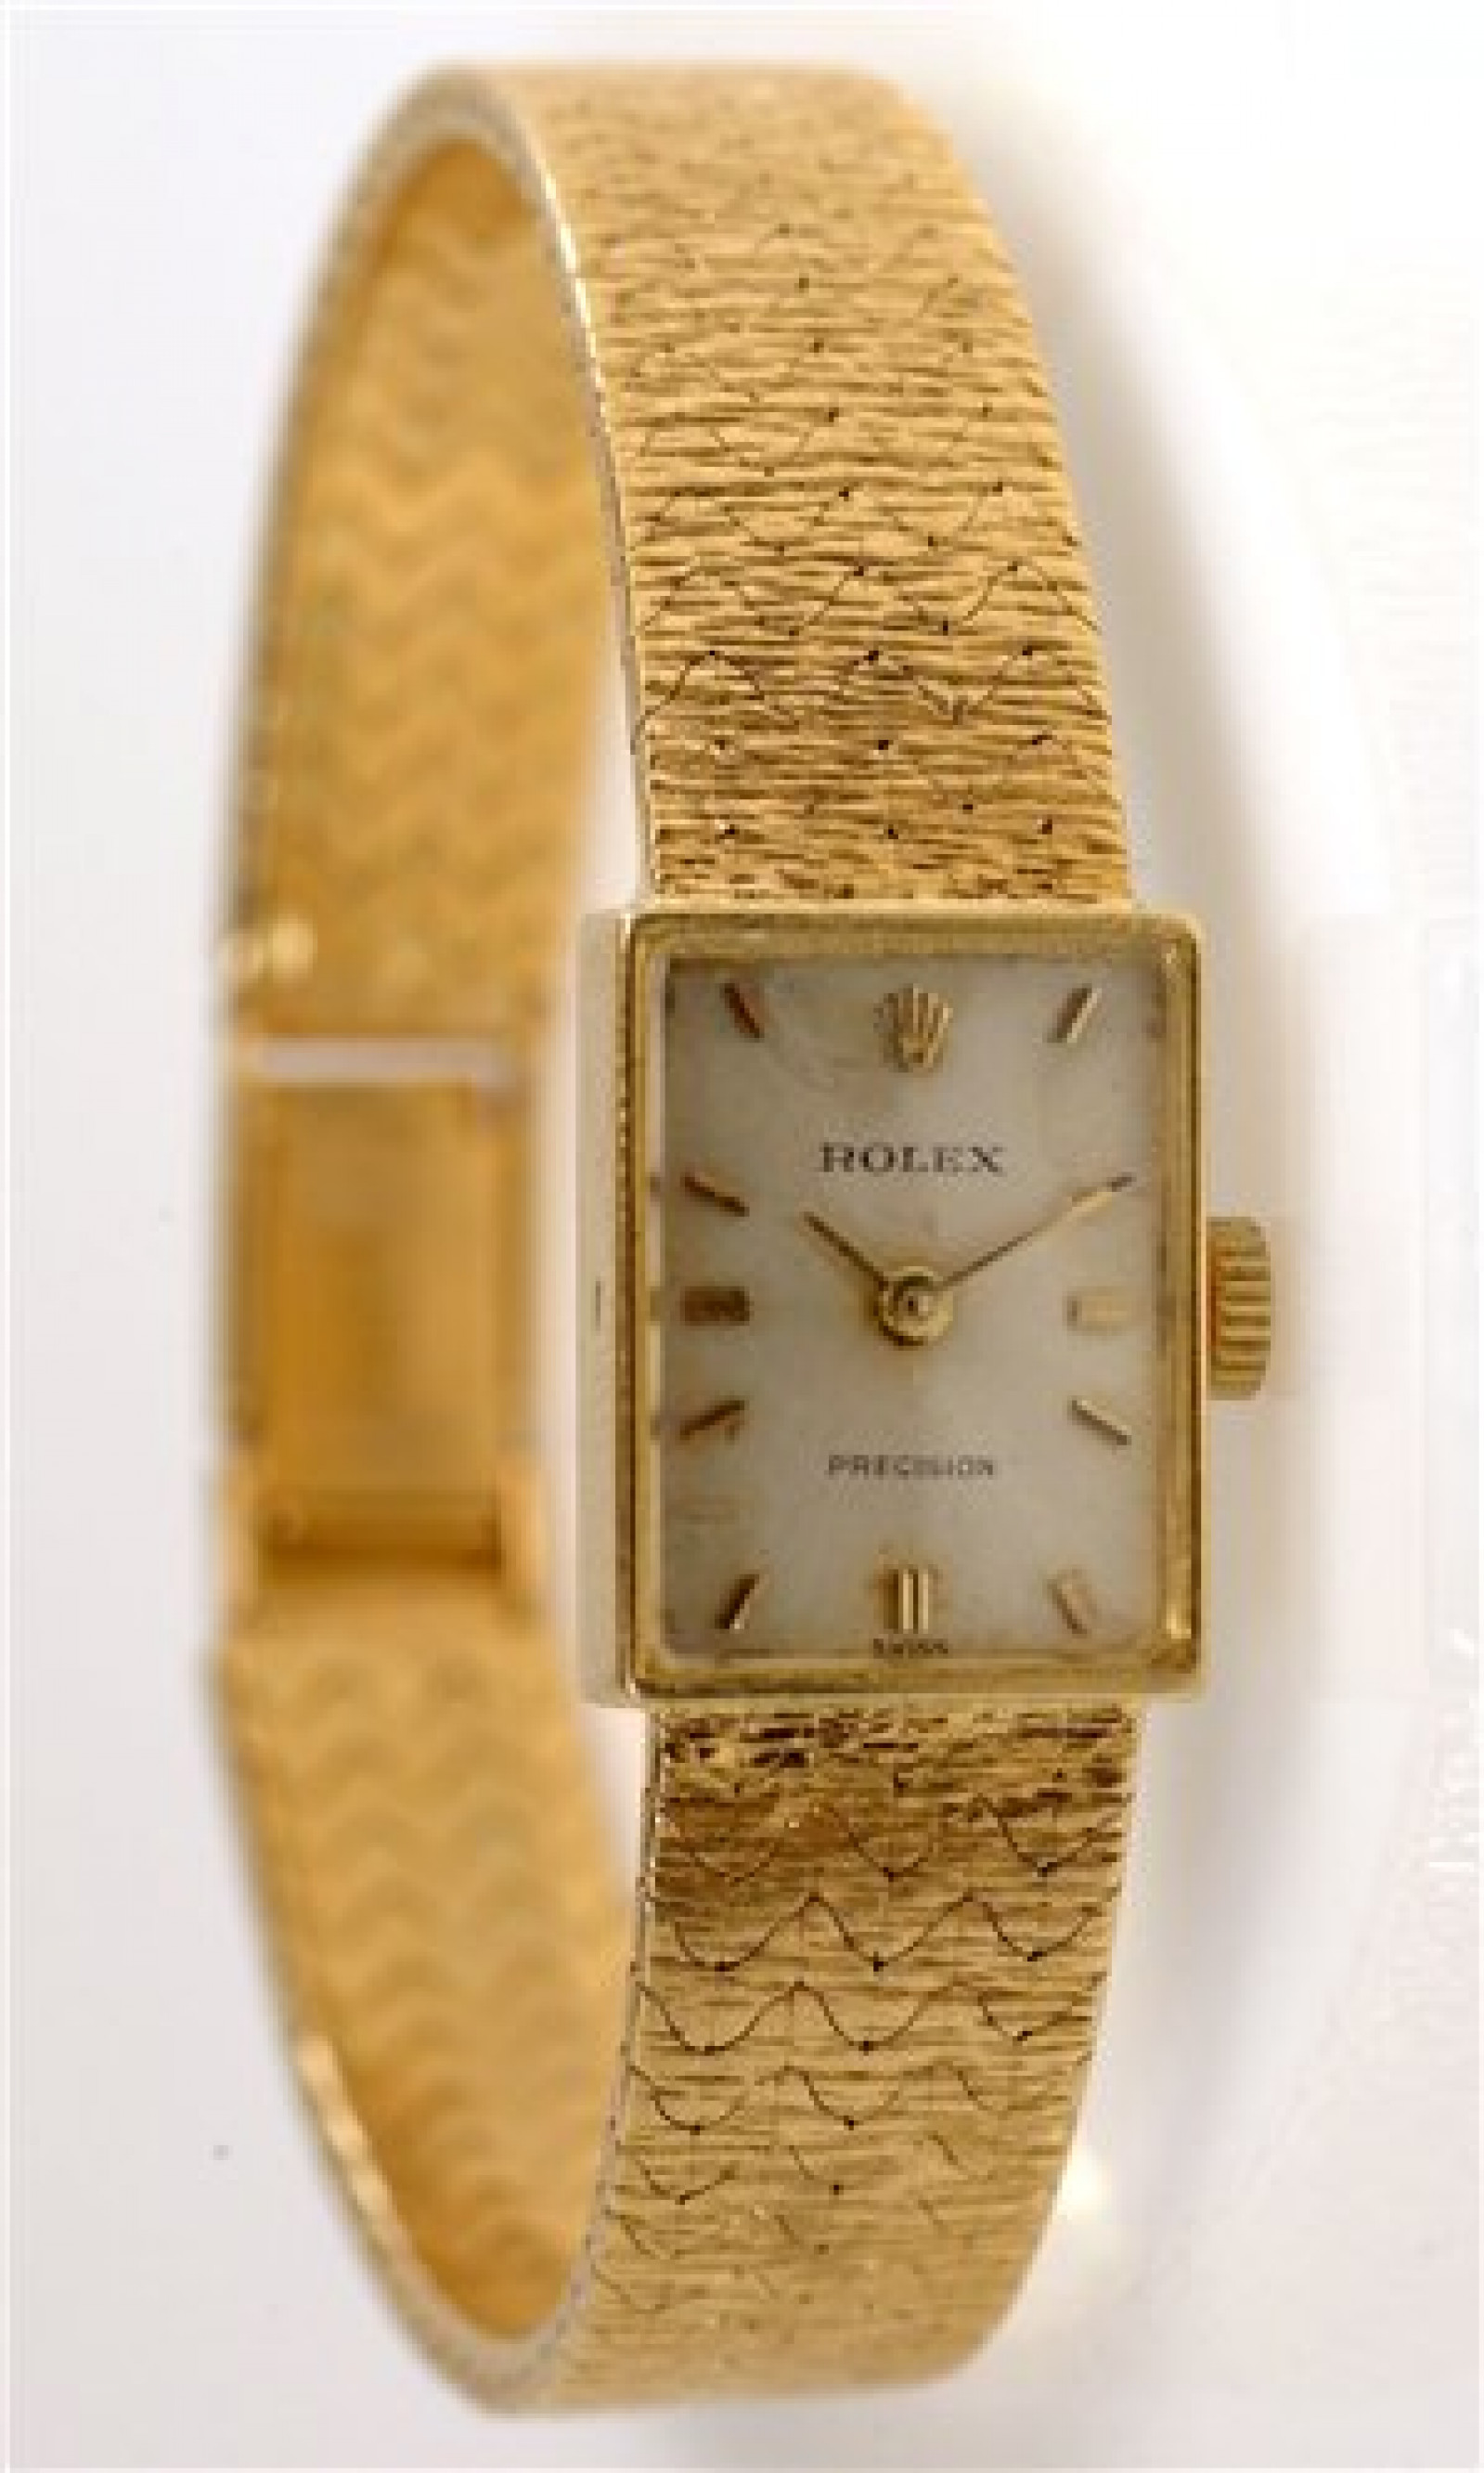 Vintage Rolex Precision 173J Gold with Silver Dial